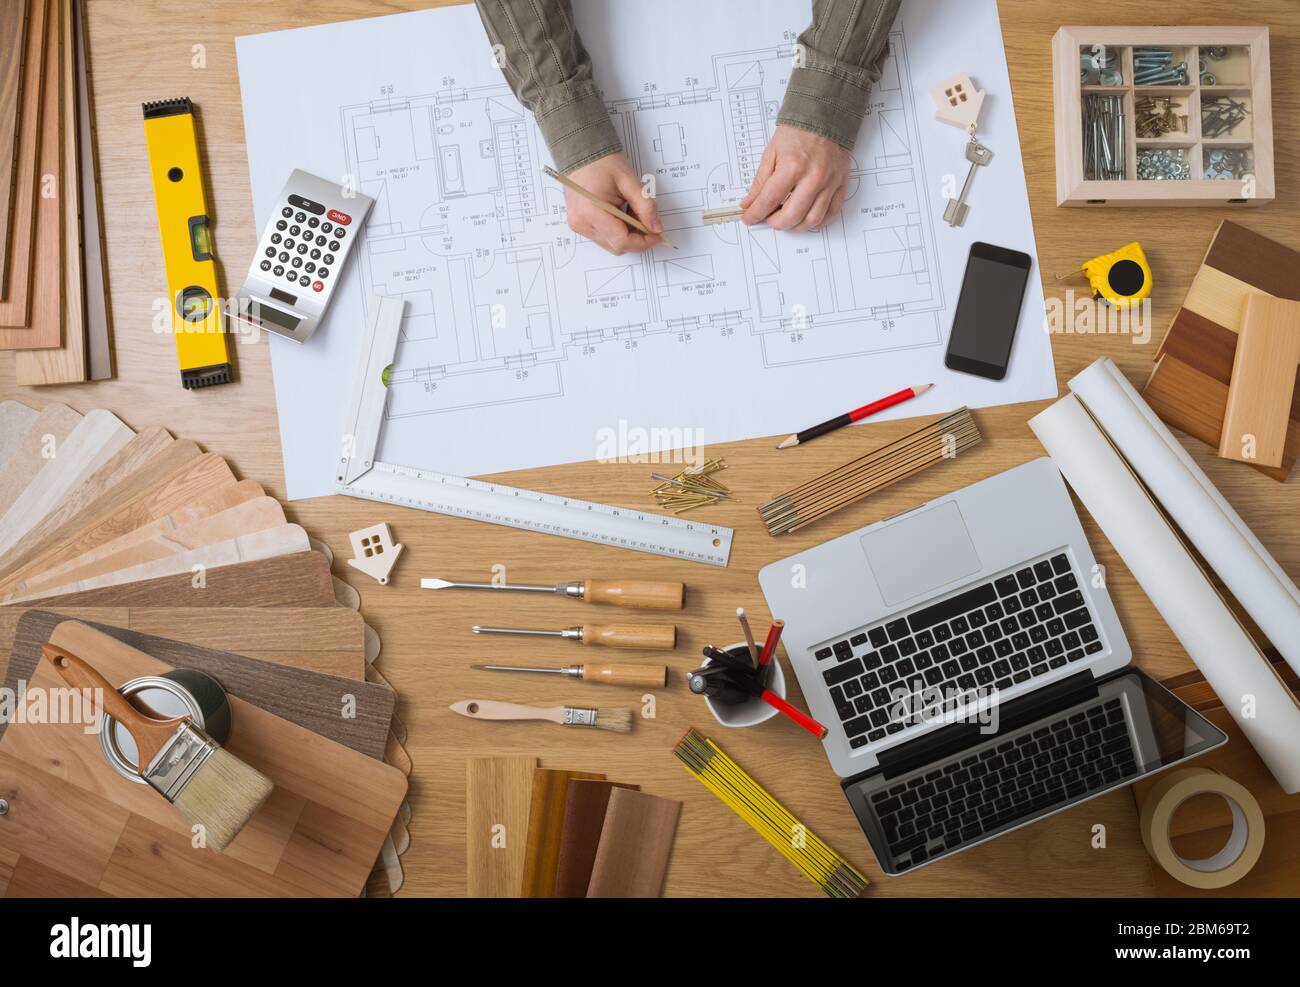 Construction engineer and architect's desk with house projects, laptop, tools and wood swatches top view, male hands drawing Stock Photo